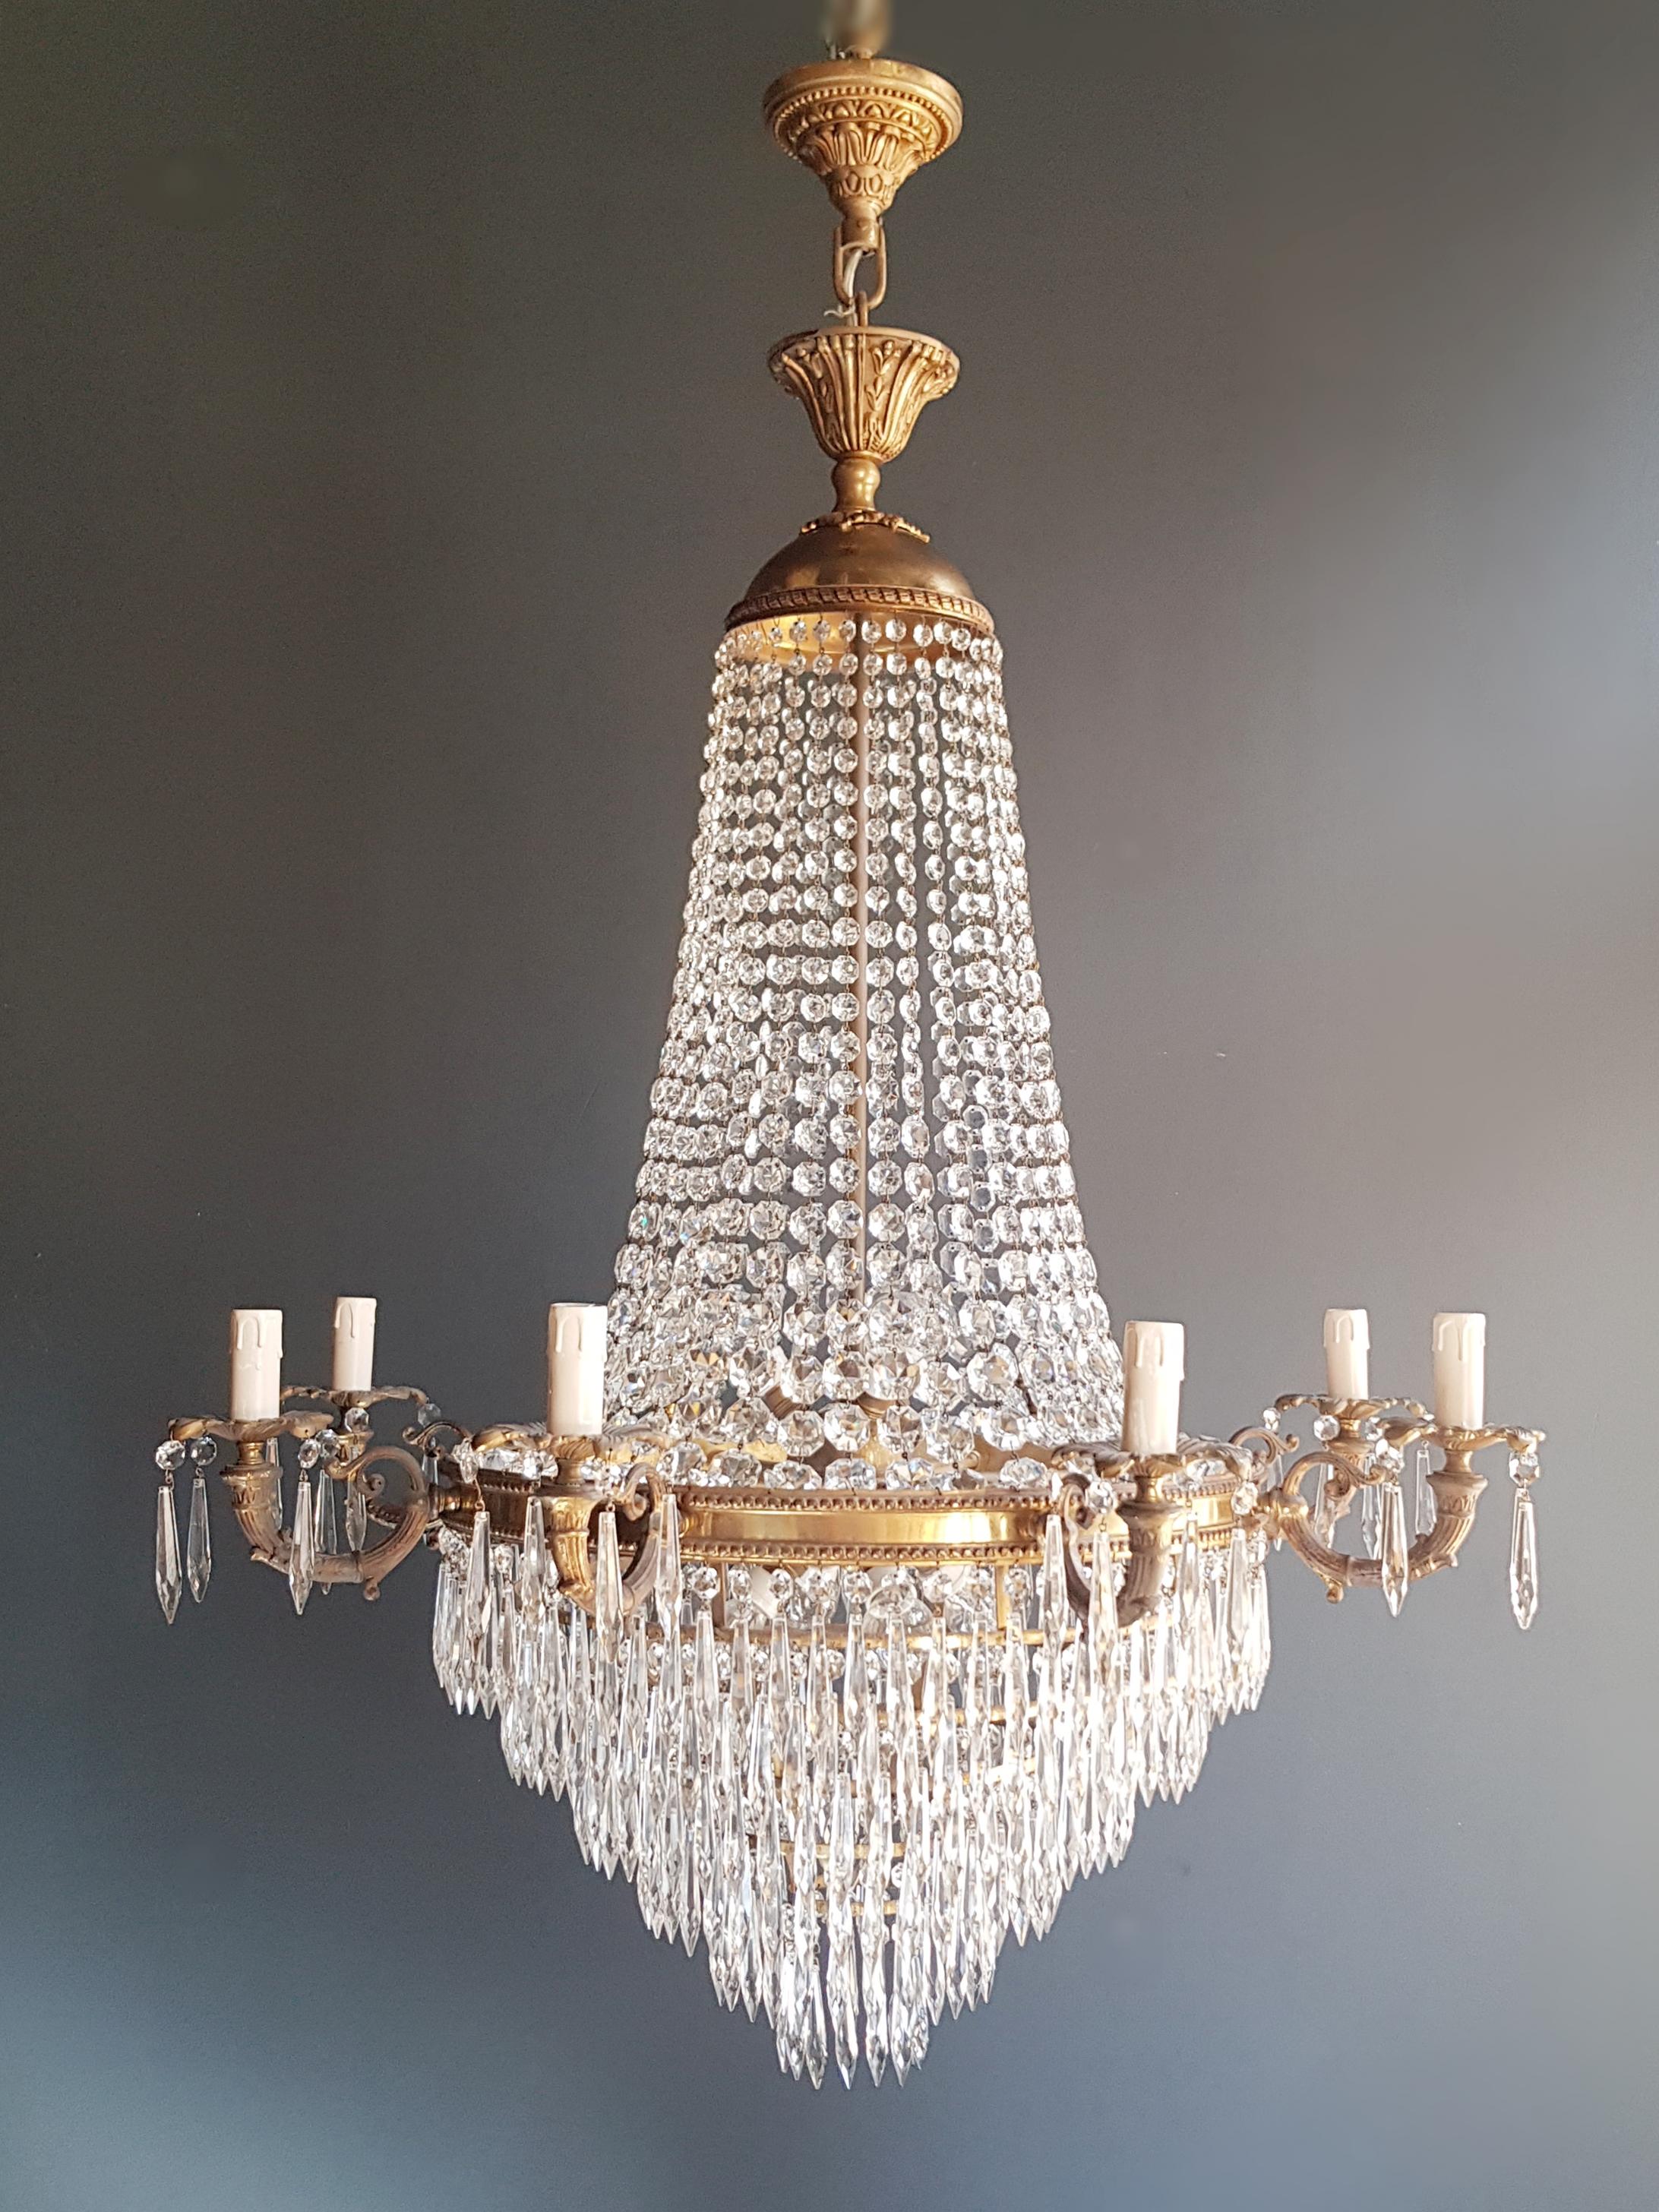 Cabling and sockets completely renewed. Crystal hand knotted
Measures: Total height 130 cm, height without chain: 110 cm, diameter 86 cm, weight (approximately) 20 kg.

Number of lights: 15-light bulb sockets: E14

Montgolfiè Empire sac a pearl